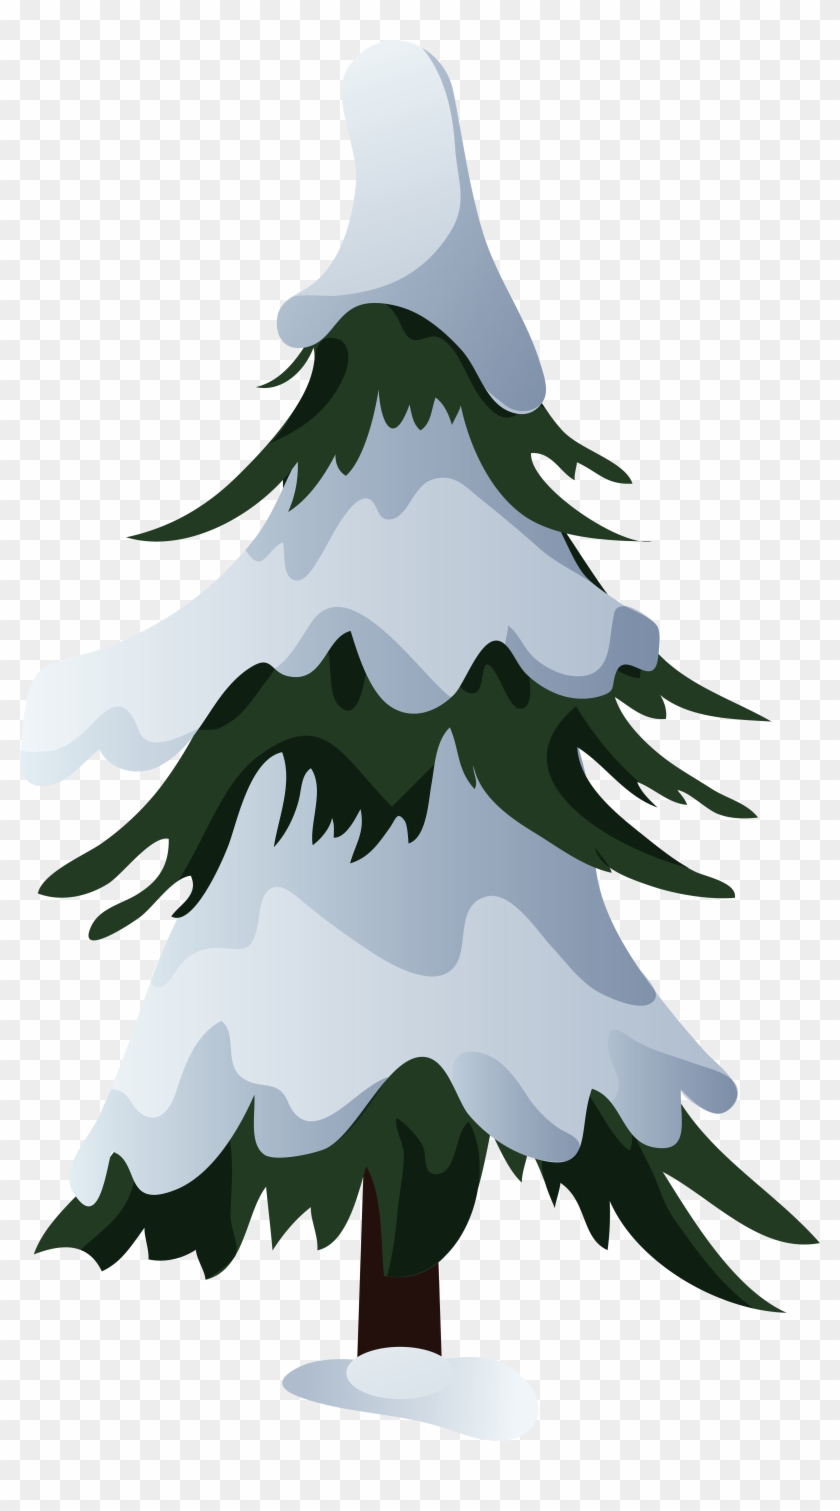 Pine Tree Clip Art Png, Transparent Png - 4566x8000(#48822) - PngFind